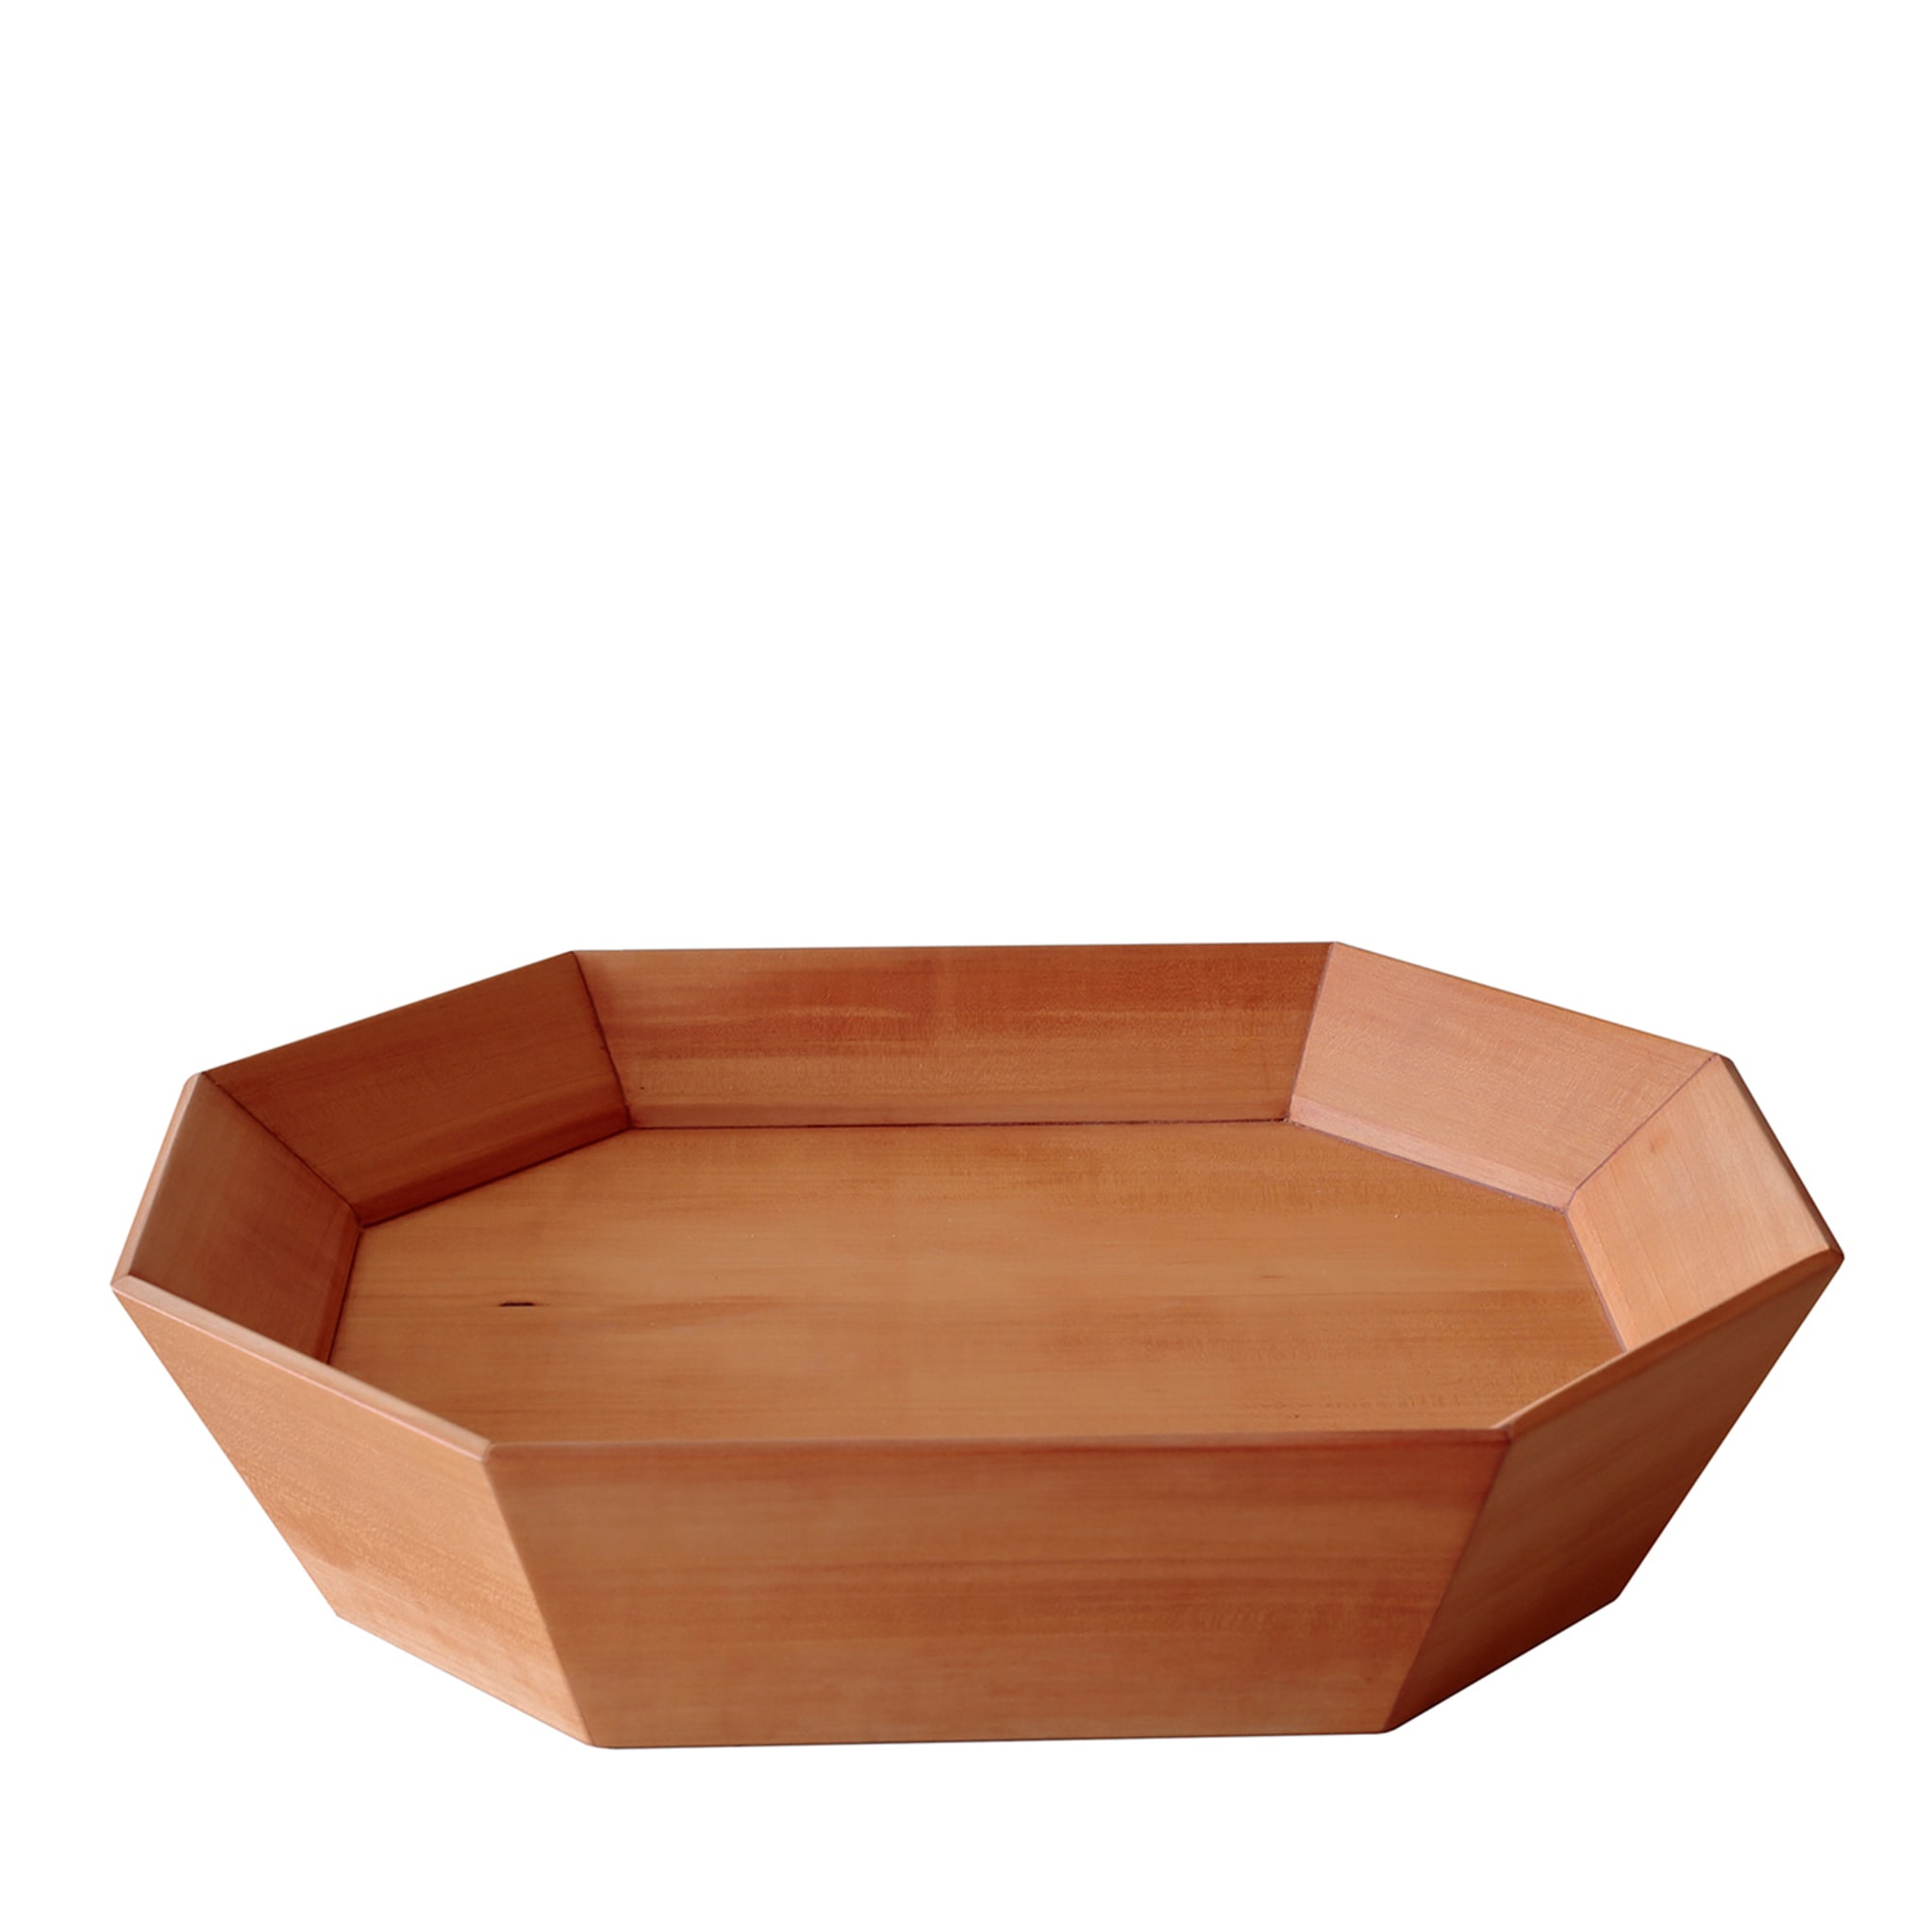 Double Pear Bowl - Main view